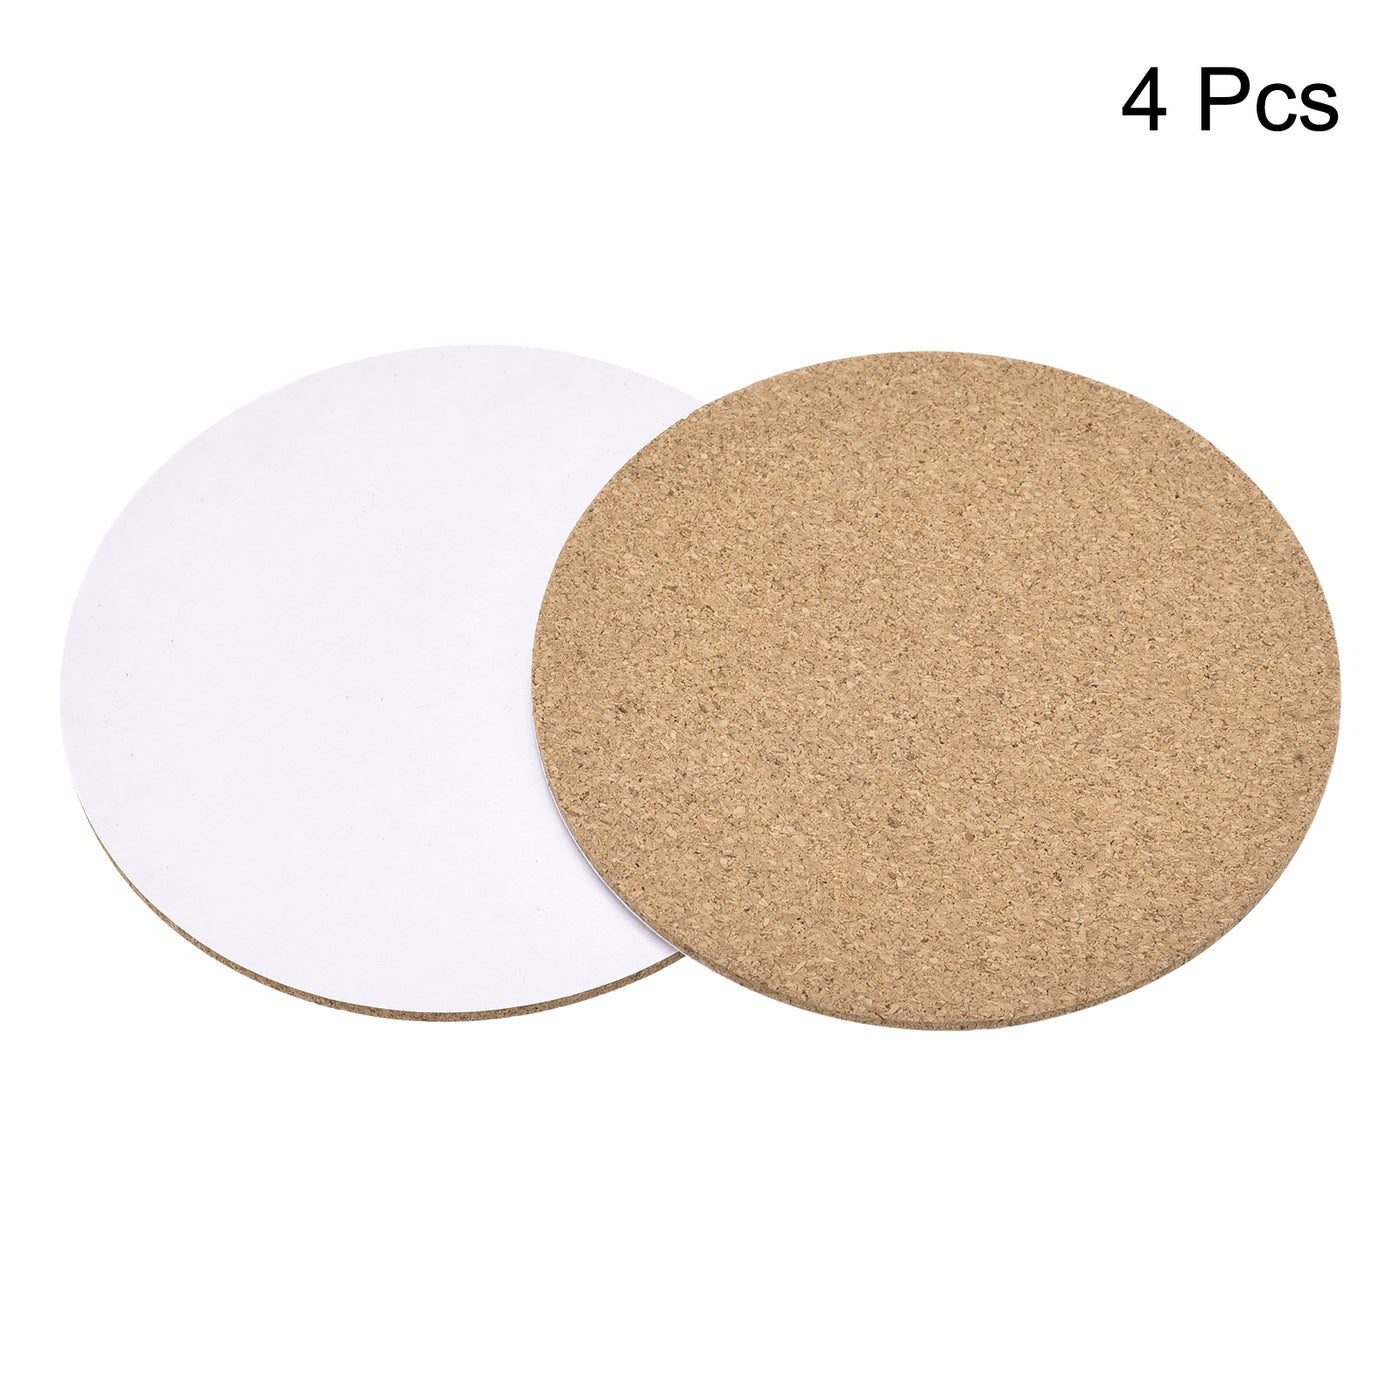 uxcell Uxcell 100mm(3.94") Round Coasters 2mm Thick Cork Cup Mat Self-Adhesive Pad 4pcs